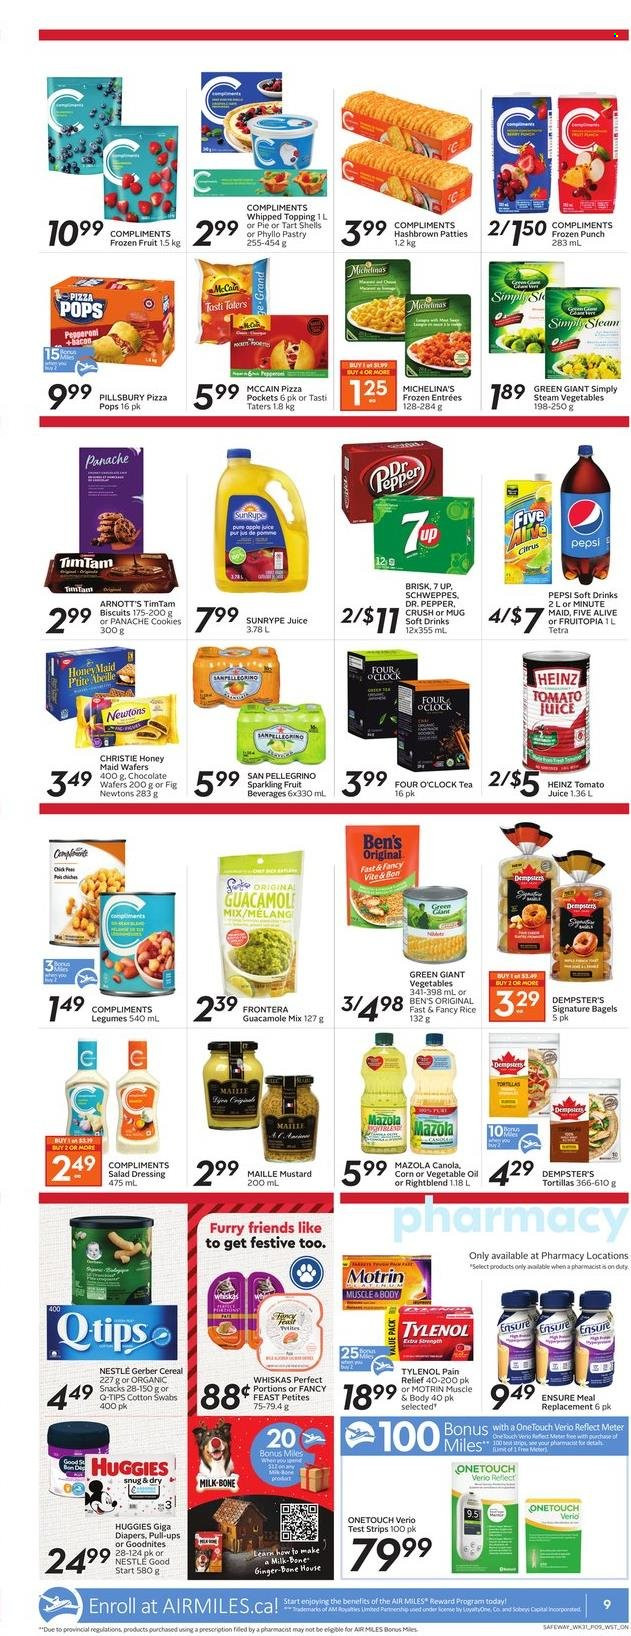 thumbnail - Safeway Flyer - November 25, 2021 - December 01, 2021 - Sales products - bagels, tortillas, pie, corn, pizza, Pillsbury, guacamole, milk, McCain, cookies, wafers, chocolate wafer, chocolate, snack, biscuit, Gerber, topping, Heinz, cereals, Honey Maid, rice, pepper, mustard, salad dressing, dressing, Schweppes, tomato juice, Pepsi, juice, Dr. Pepper, soft drink, 7UP, fruit punch, San Pellegrino, tea, nappies, Fancy Feast, pain relief, Tylenol, Motrin, Nestlé, Huggies, Whiskas. Page 10.